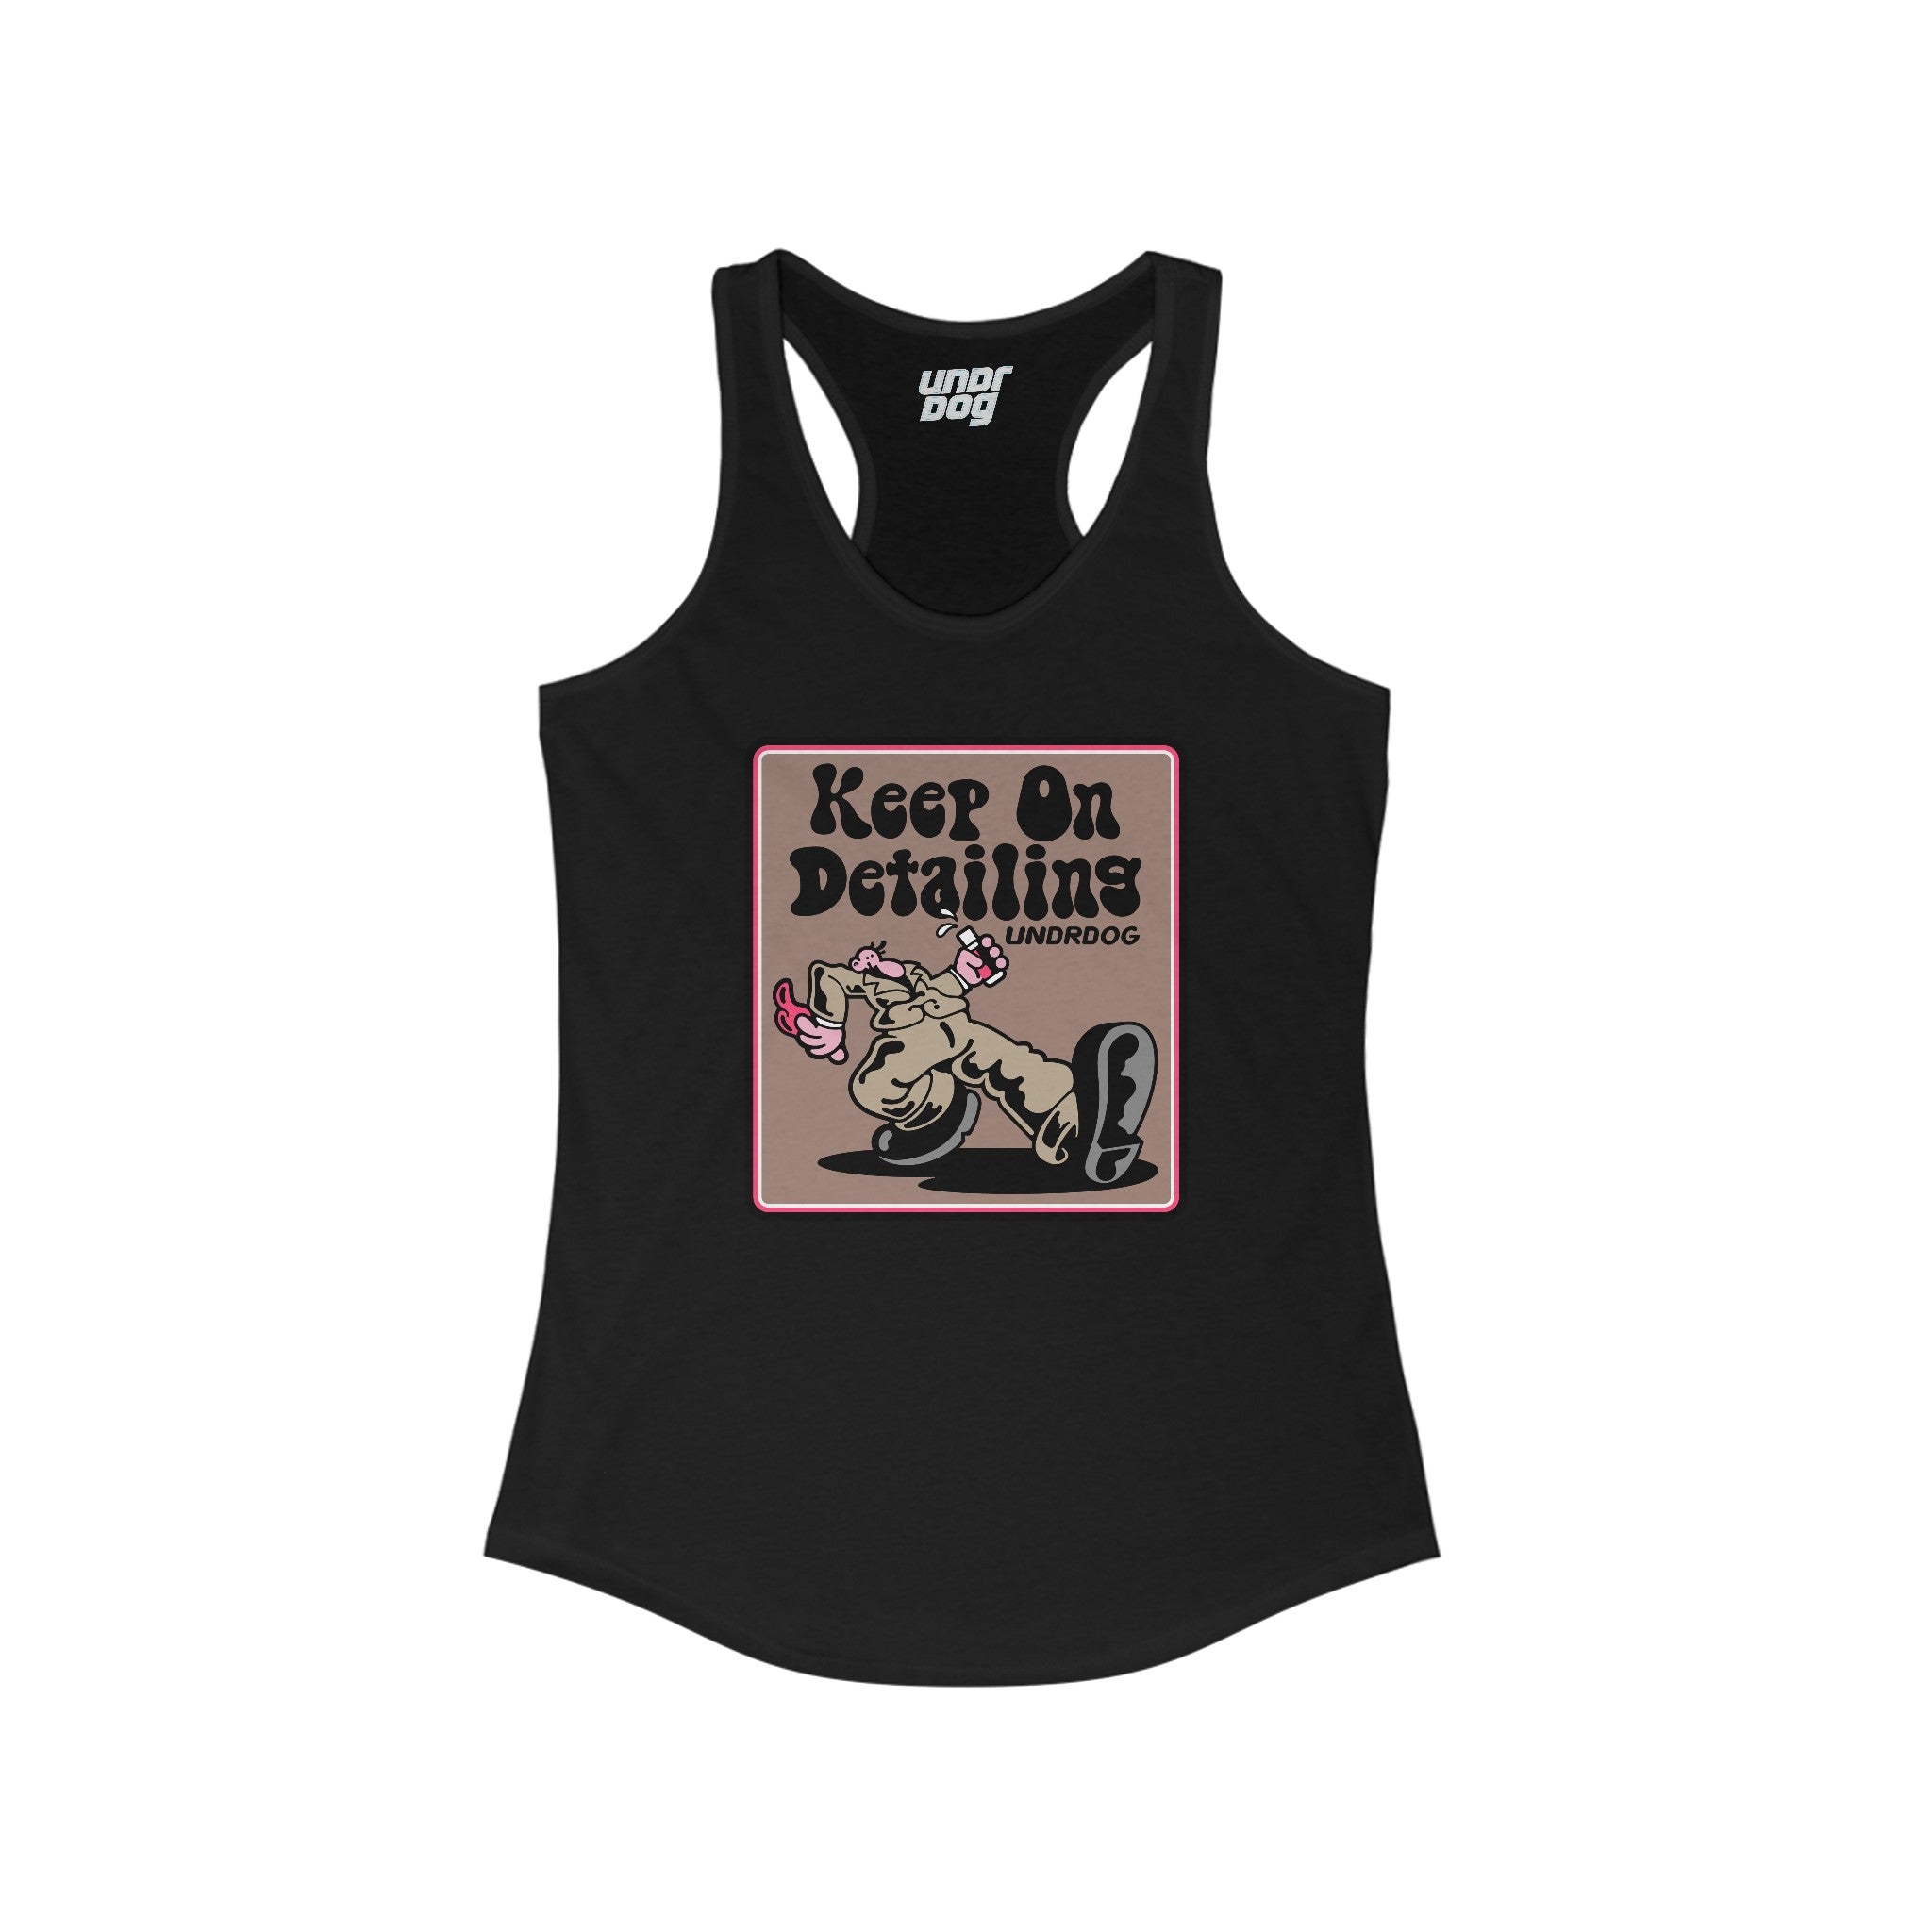 1435902400381897496_2048.jpg - Keep on Detailing v2 Women's Tank - Undrdog Surface Products